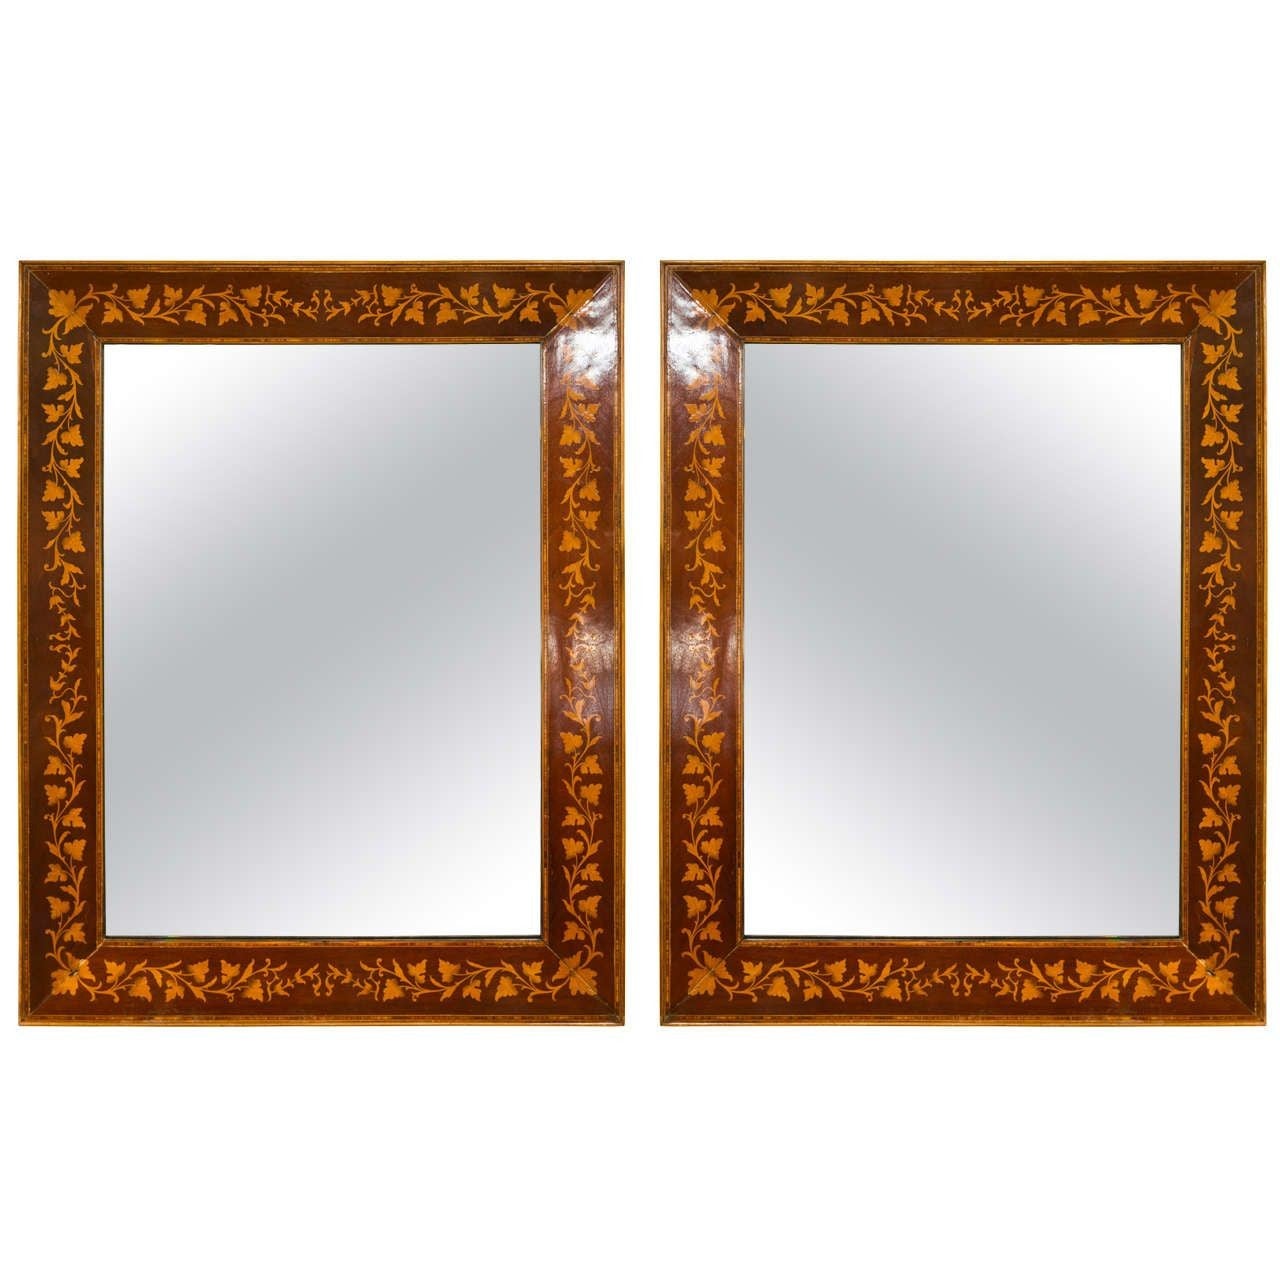 Adam’s Style, Small Wall Mirrors, Leaf Motif, Satinwood, Distressed, USA, 1930s For Sale